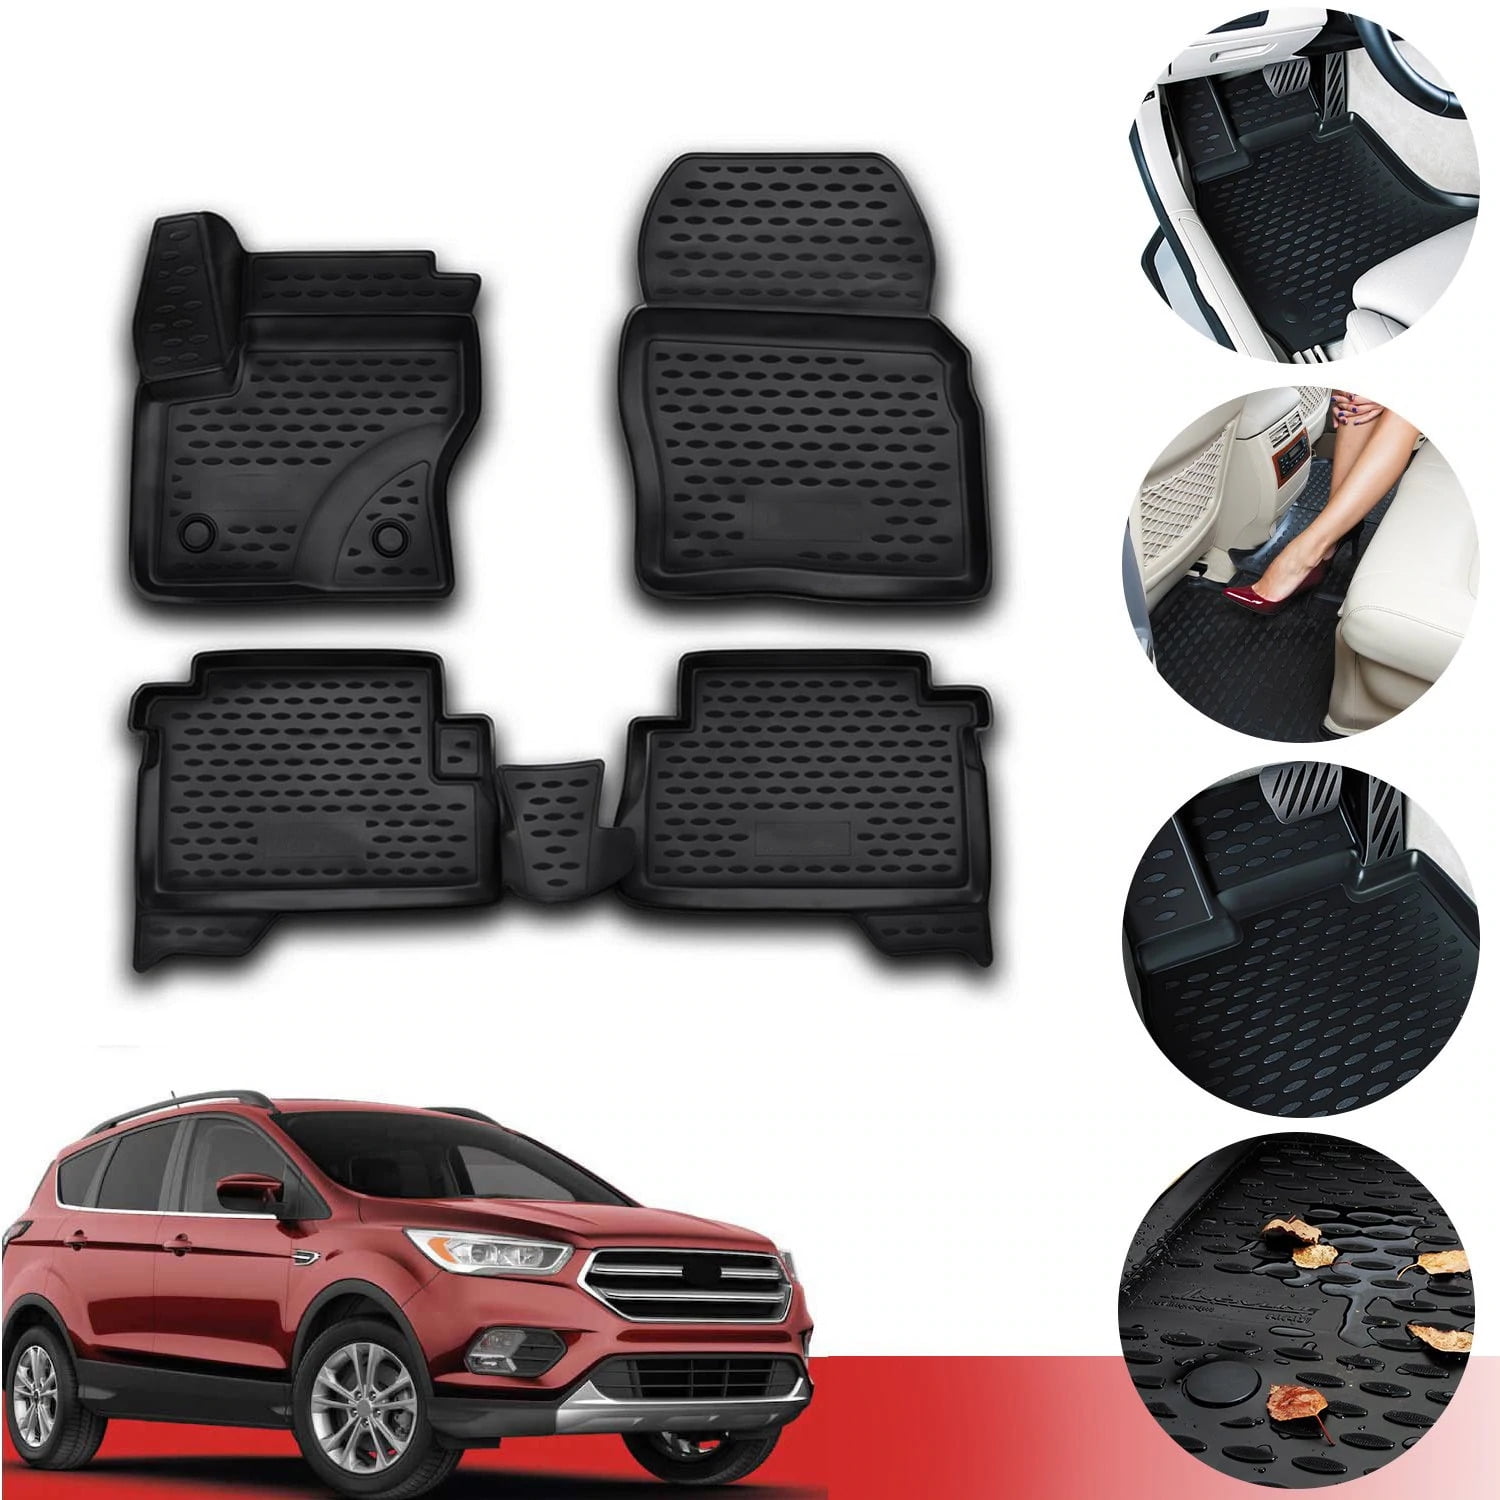 Rear OsoTorero Floor Mats for 13-19 Ford Escape Full Set Liners Heavy Duty Rubber 1st and 2nd Row: Front Custom fit TPE Floor Liners for 2013-2019 Ford Escape